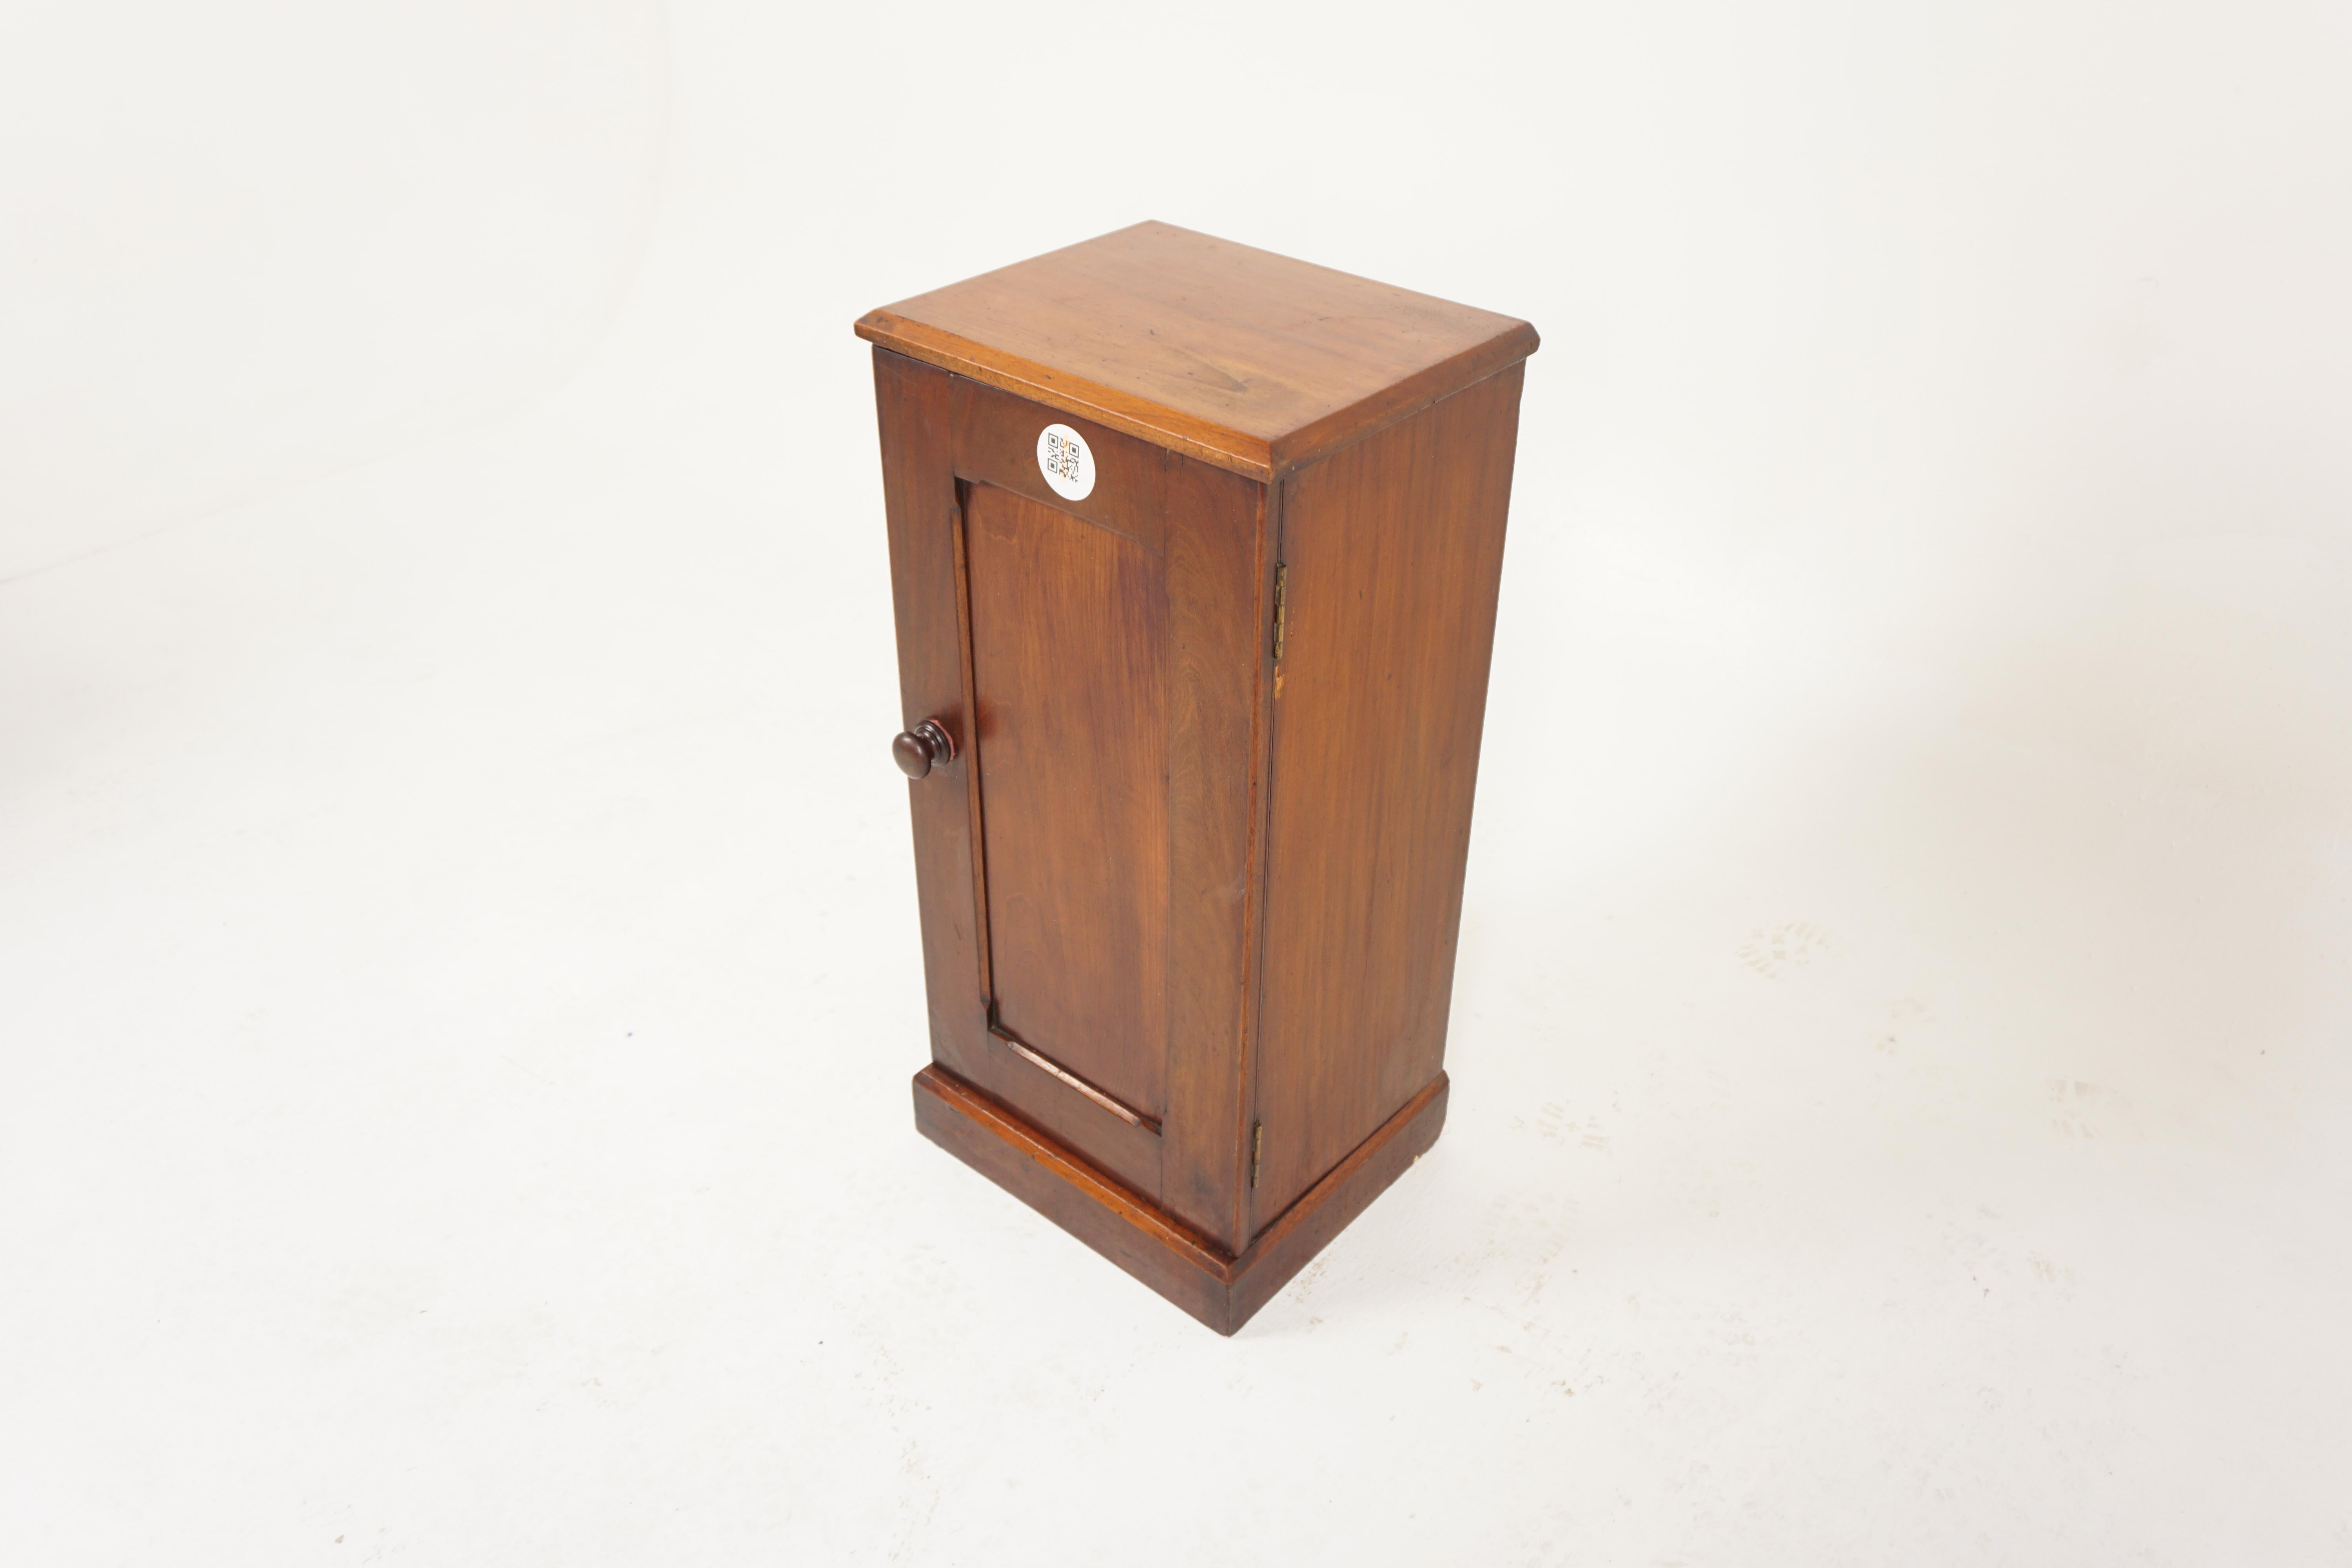 Victorian Walnut Nightstand Beside Cabinet, Lamp Table, Scotland 1880, H175

Scotland 1880
Solid Walnut
Original Finish

Rectangular Moulded Top
Singles panelled door opens to reveal single shelf interior
Original wooden knob
Standing on a closed